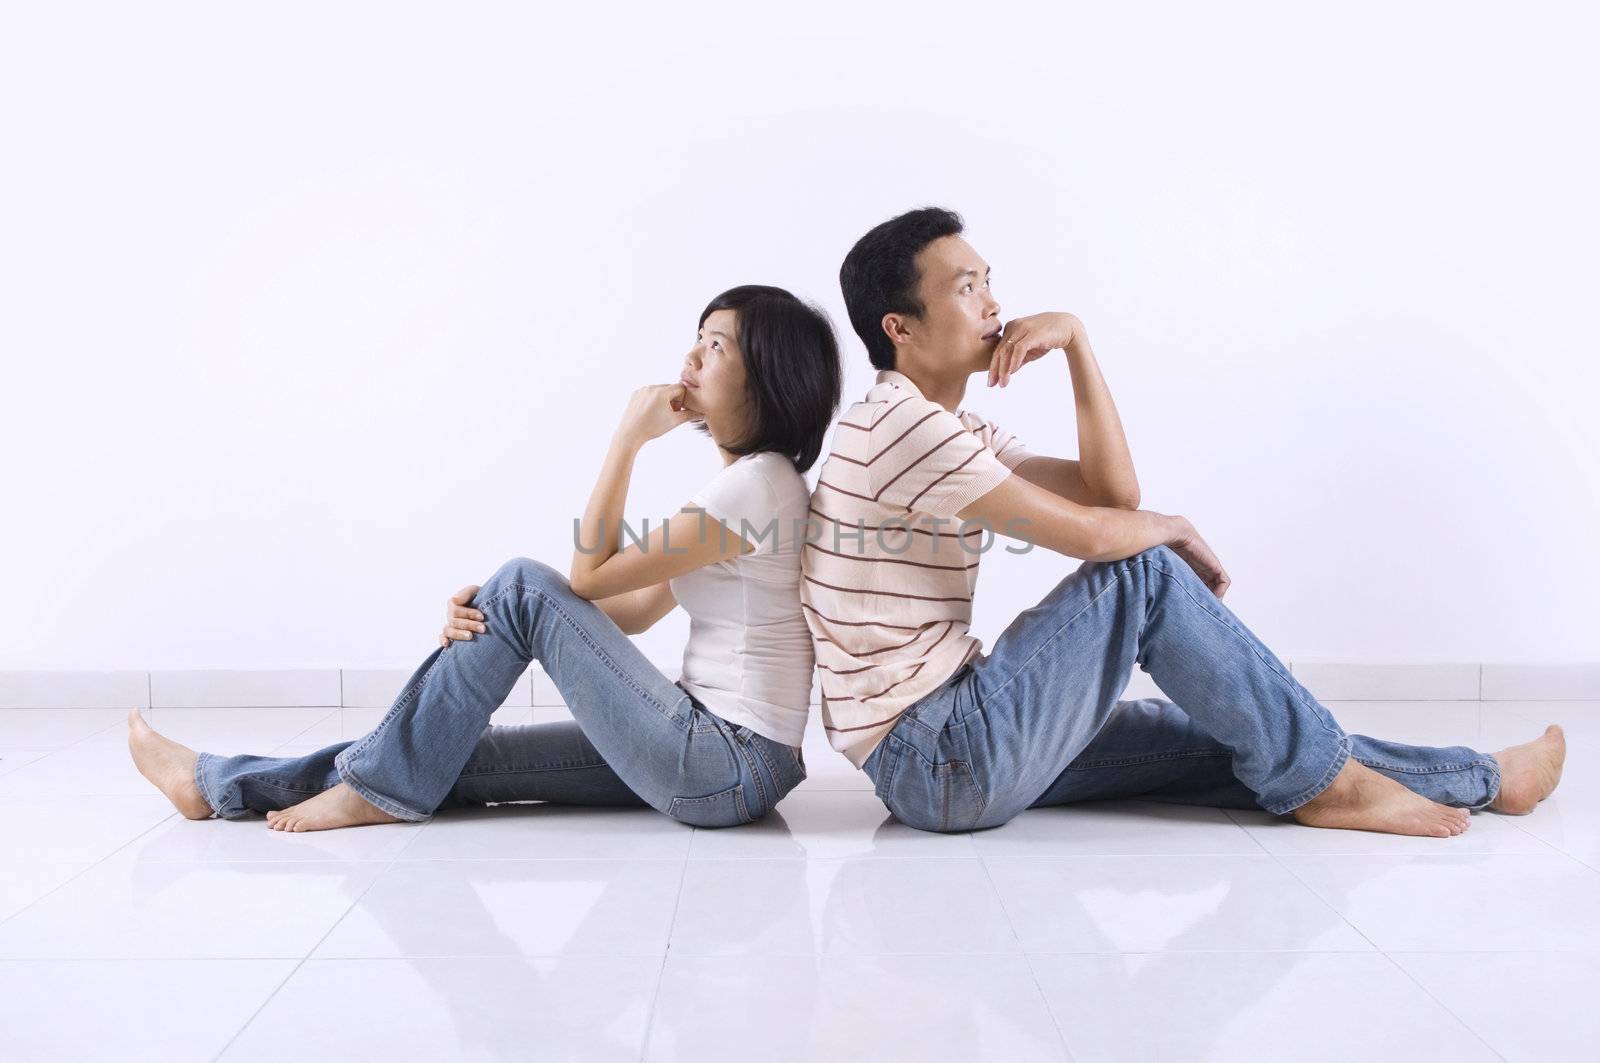 Young Asian adult couple sitting together on tiles floor in home having thought.